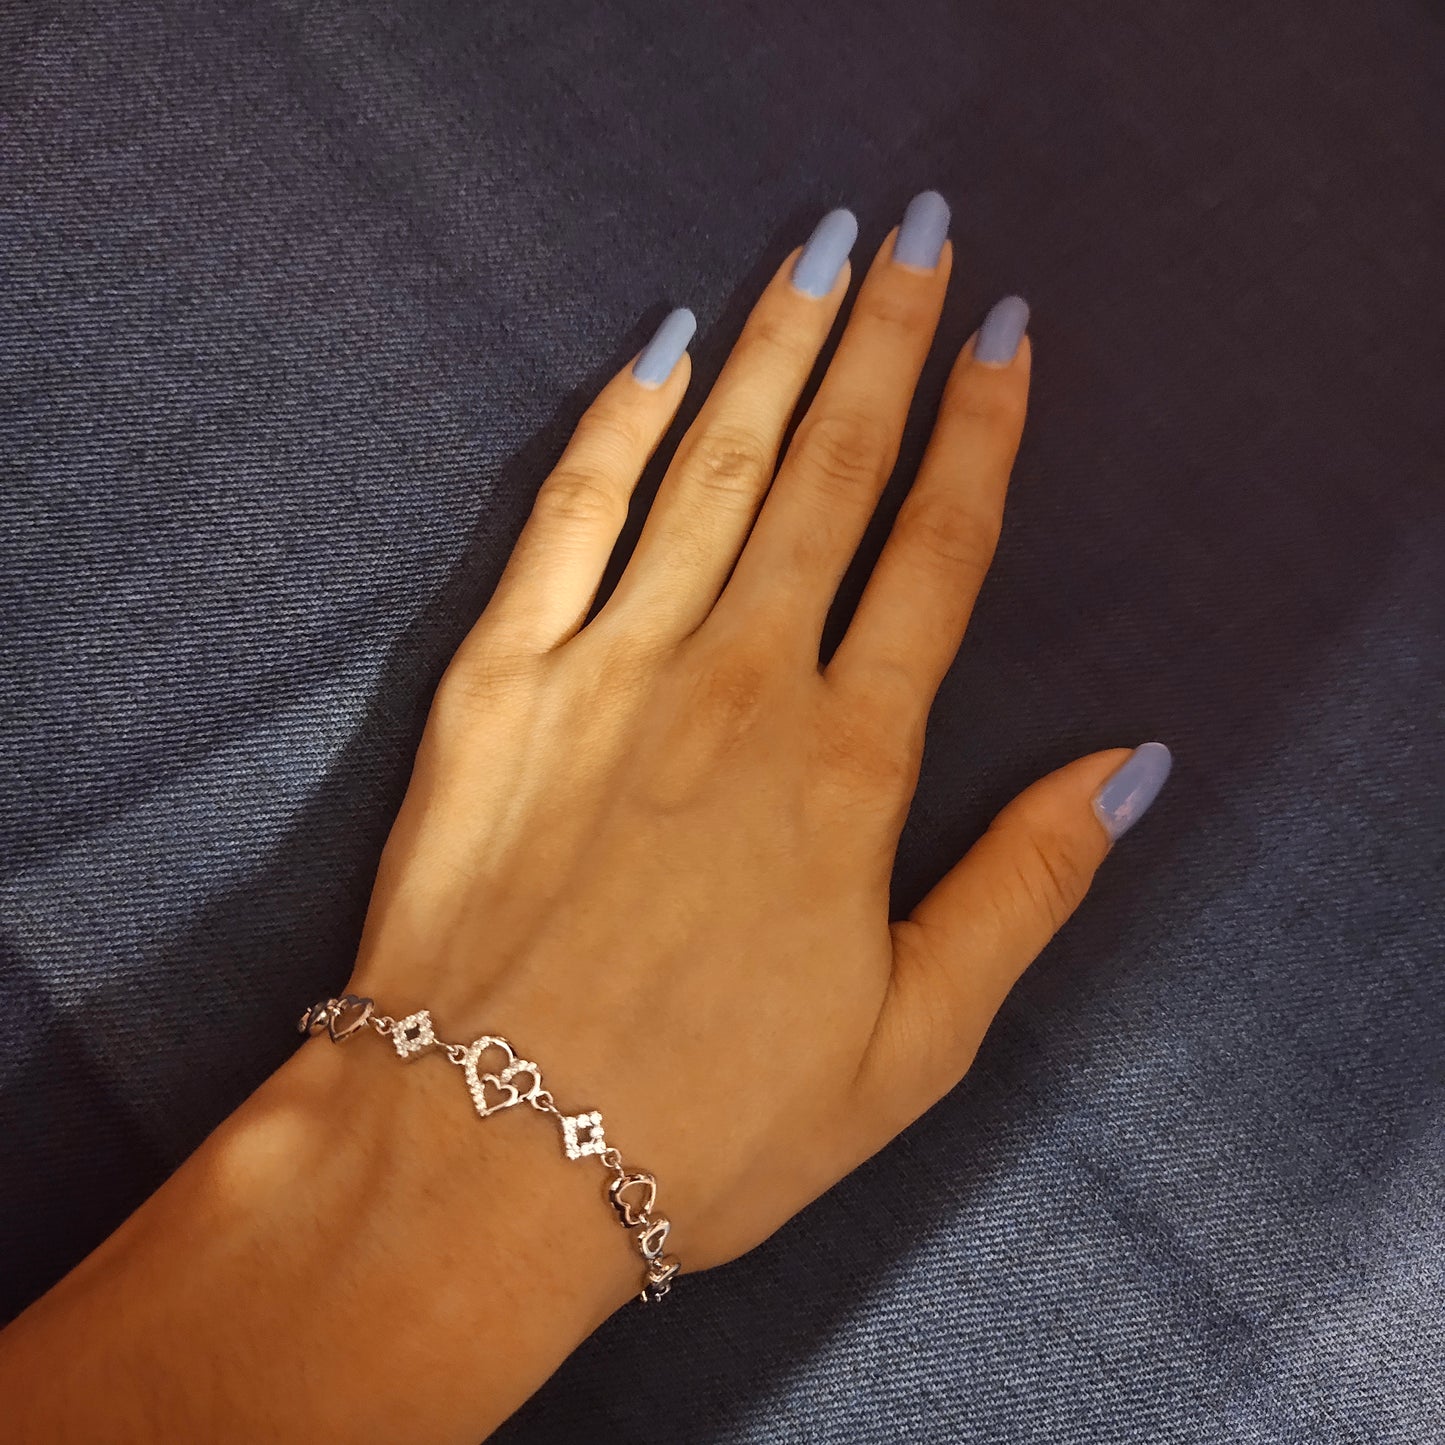 "Chic College Style: Elevate Your Look with Asp Fashion Jewellery's 925 Silver Bracelet"